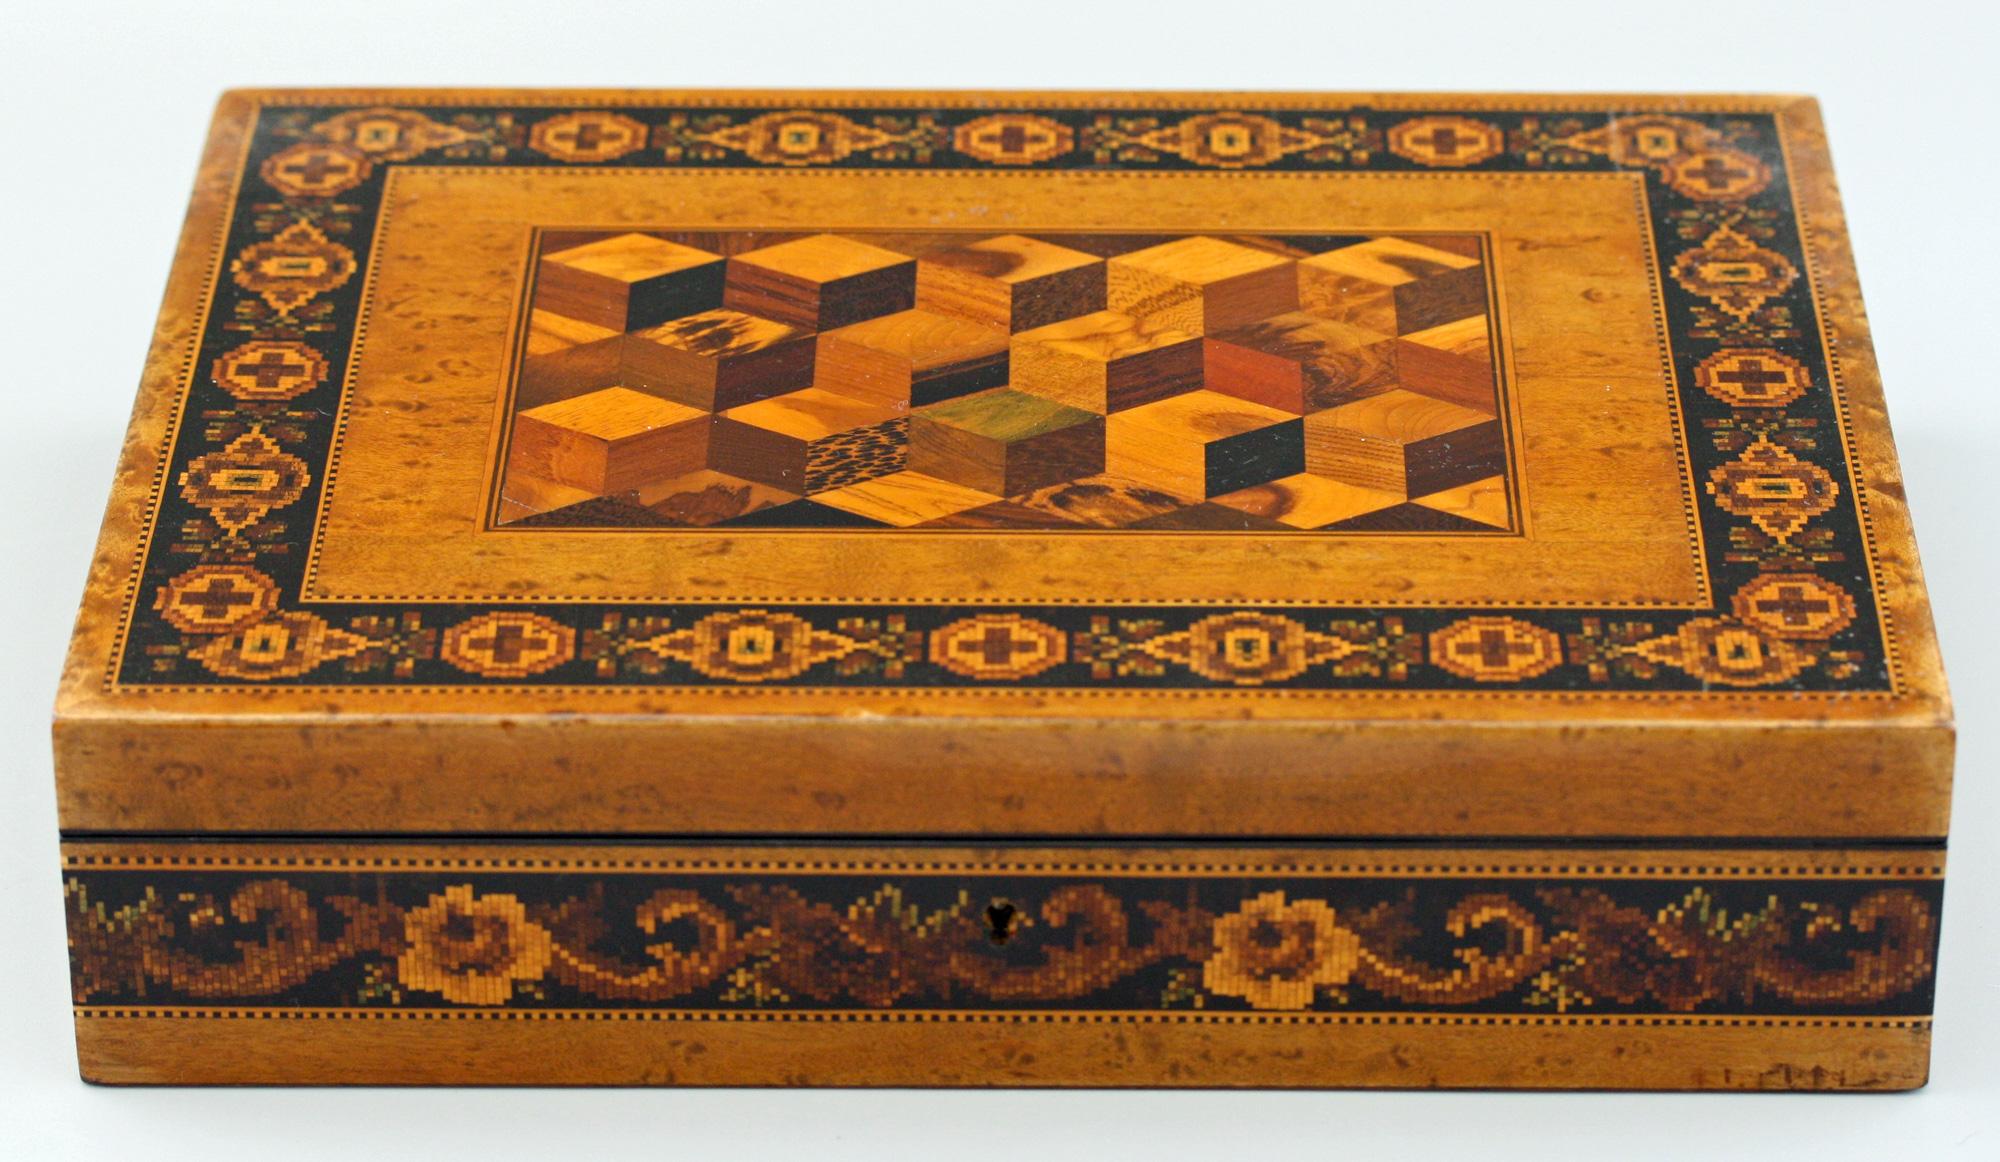 An exceptional and original antique wooden Tunbridge ware box, possibly for games, made by Thomas Barton (1819-1903). This exquisite, versatile and well sized box has a hinged cover decorated with a cube work panel within a geometric mosaic border